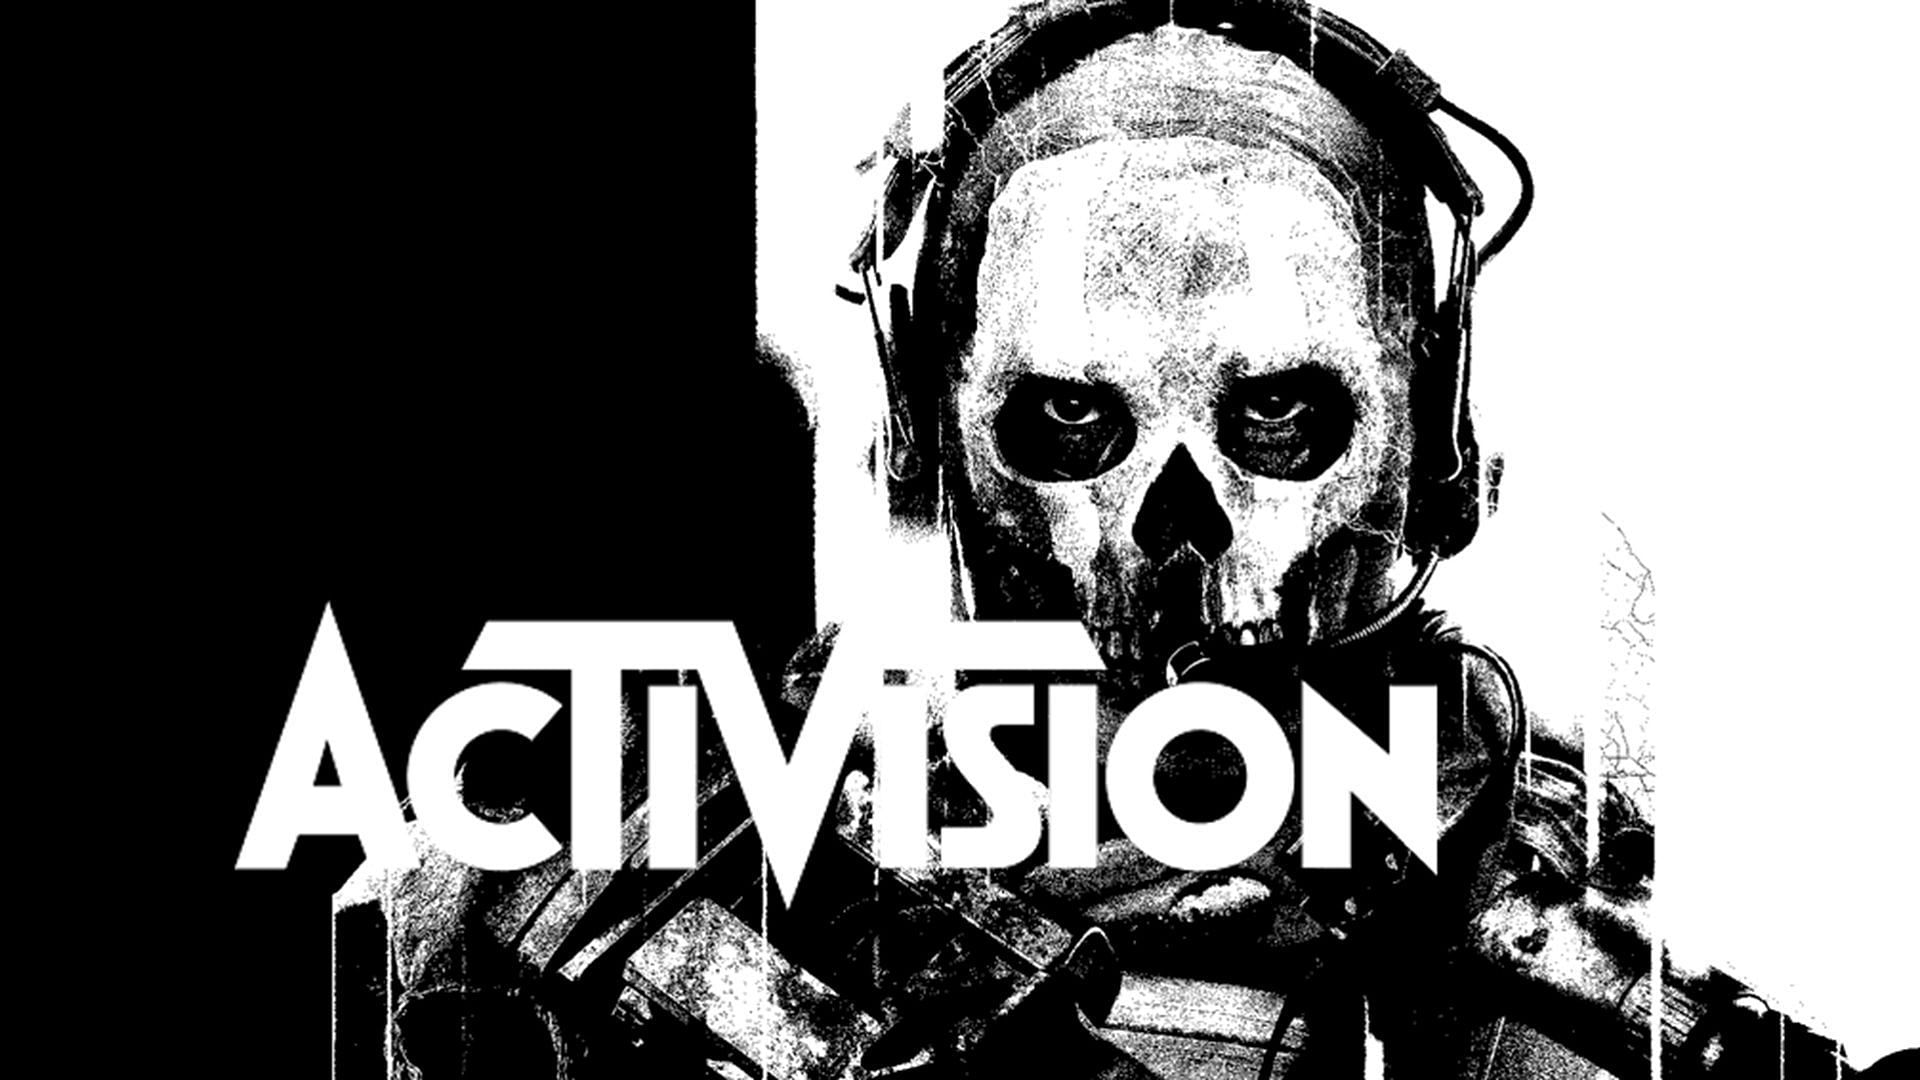 Call of Duty publisher Activision has revealed through a job listing that it